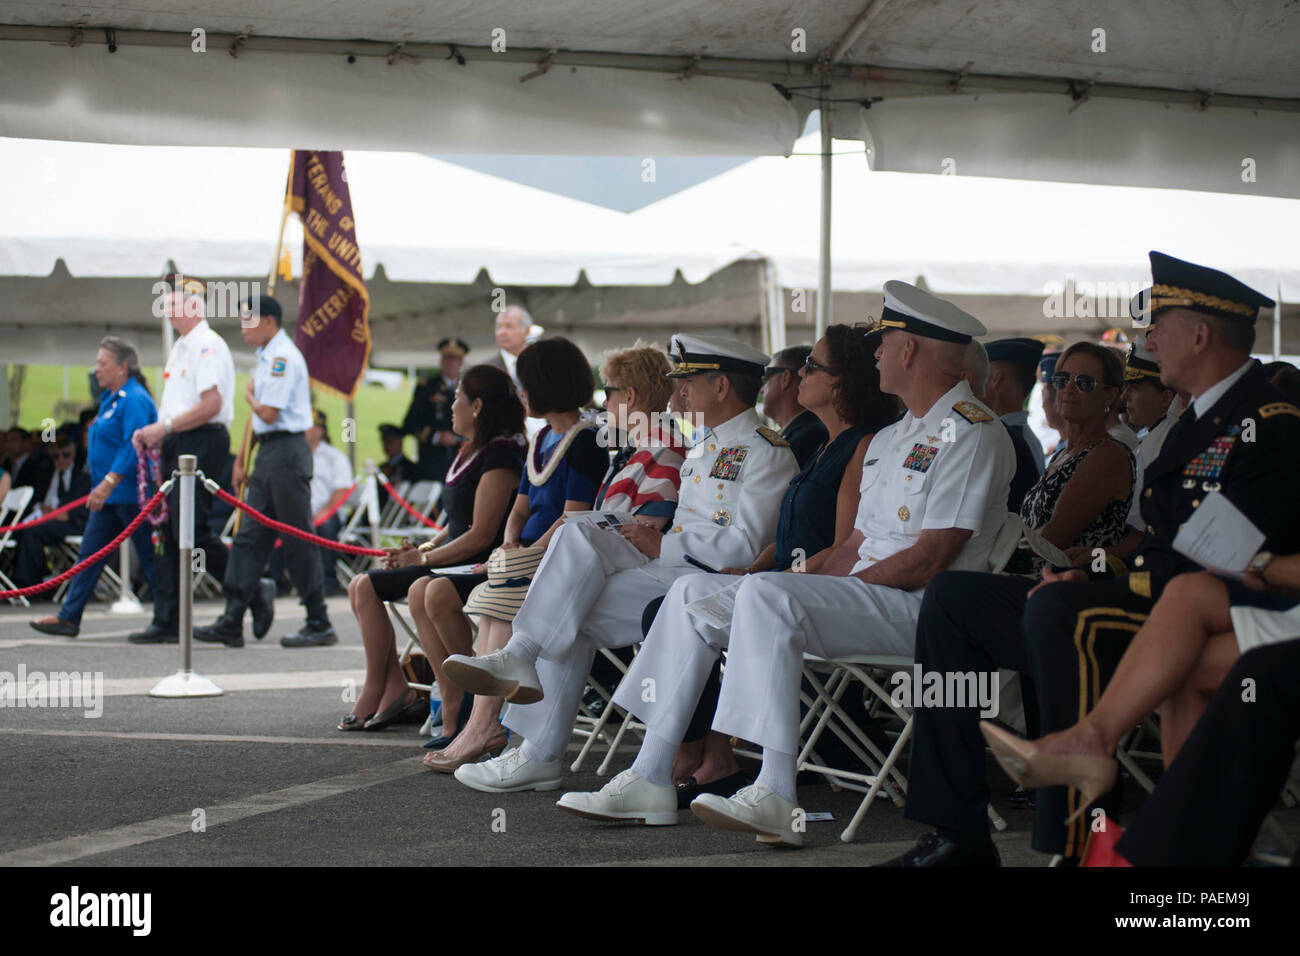 KANEOHE, Hawaii (May 30, 2016) Commanders of: U.S. Pacific Command, U.S. Pacific Fleet, U.S. Pacific Air Forces, U.S. Army Pacific, U.S. Marine Forces Pacific and U.S. Coast Guard 14th District watch a presentation of floral leis during the 2016 Governor’s Memorial Day Ceremony at the Hawaii State Veterans Cemetery in Kaneohe, Hawaii. The theme for this year’s event is: “Sacrificed All to Preserve Liberty.” Stock Photo